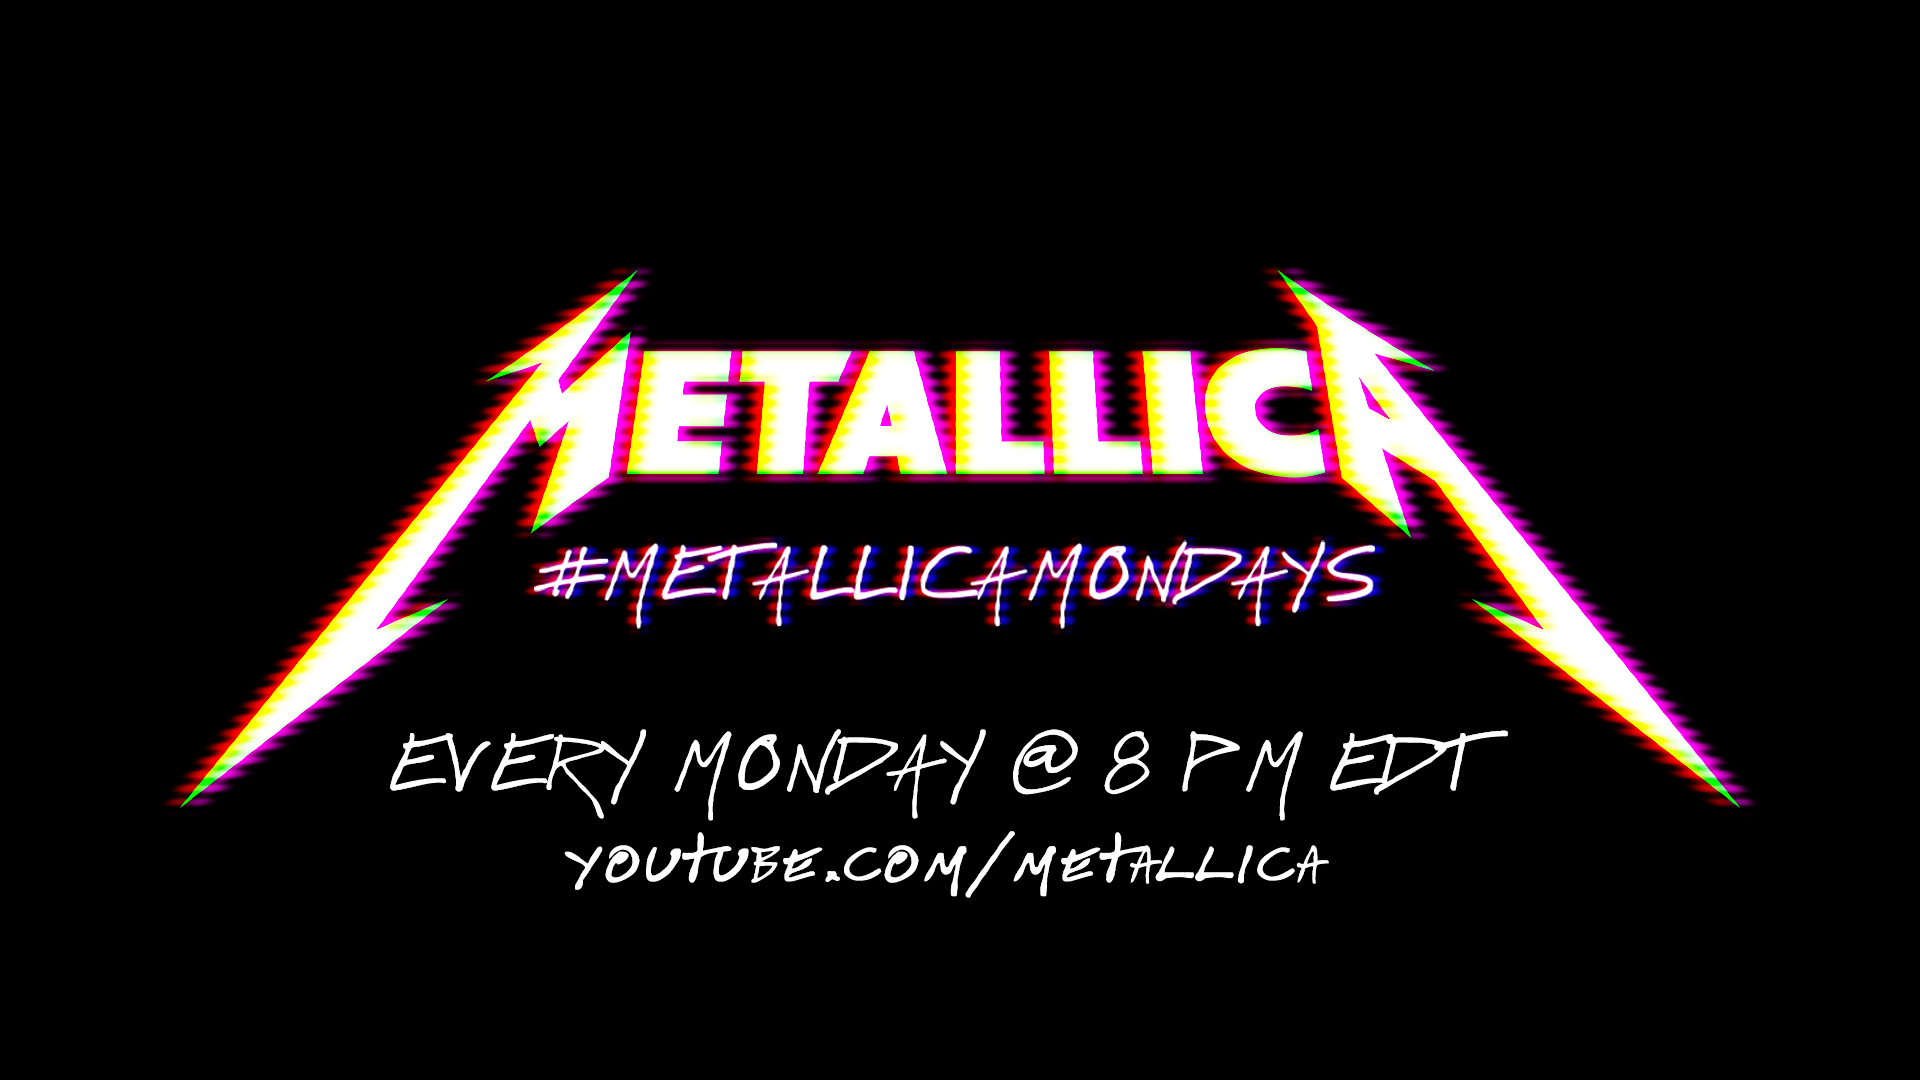 Subscribe to Metallica's YouTube Channel